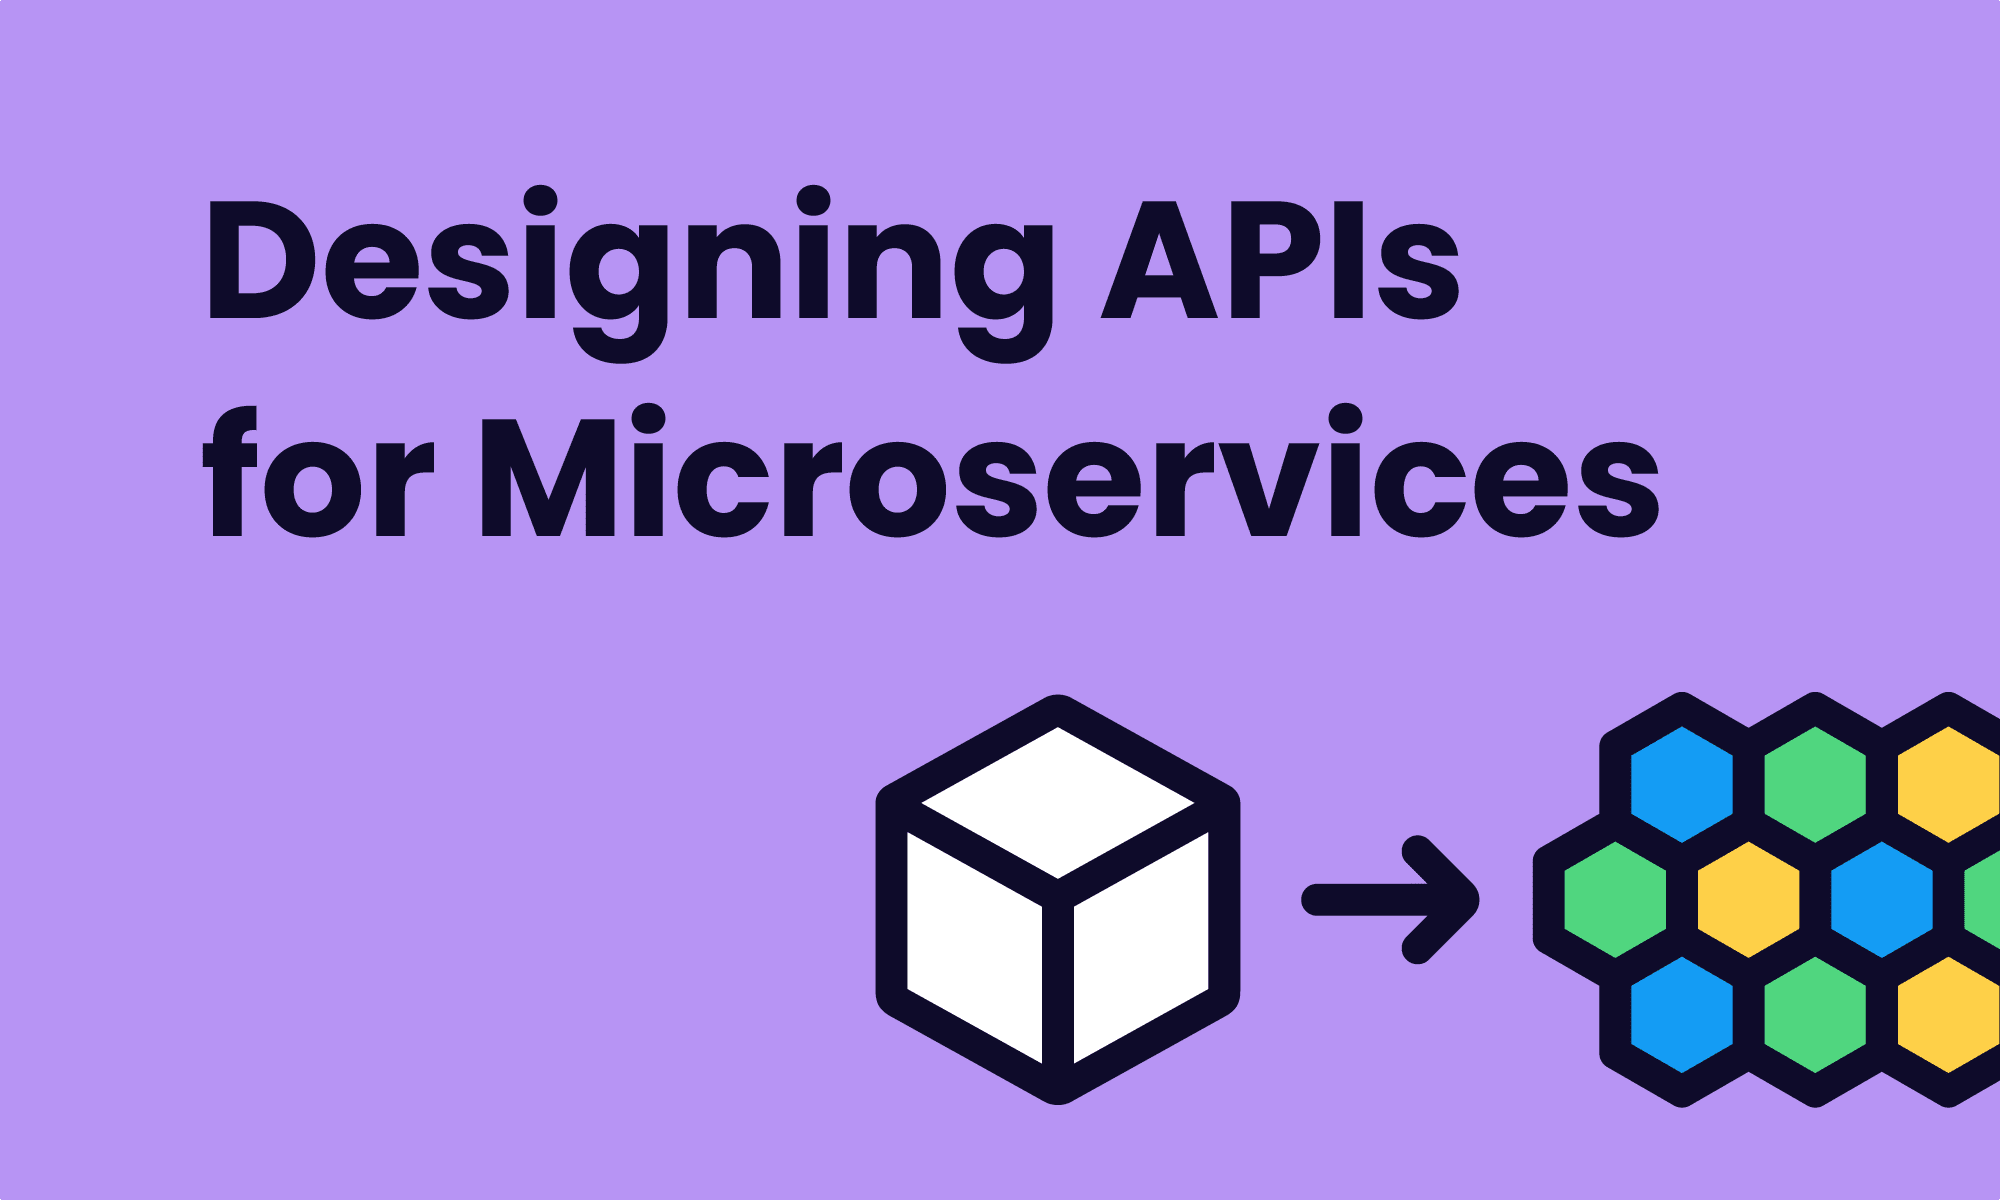 Designing APIs for Microservices